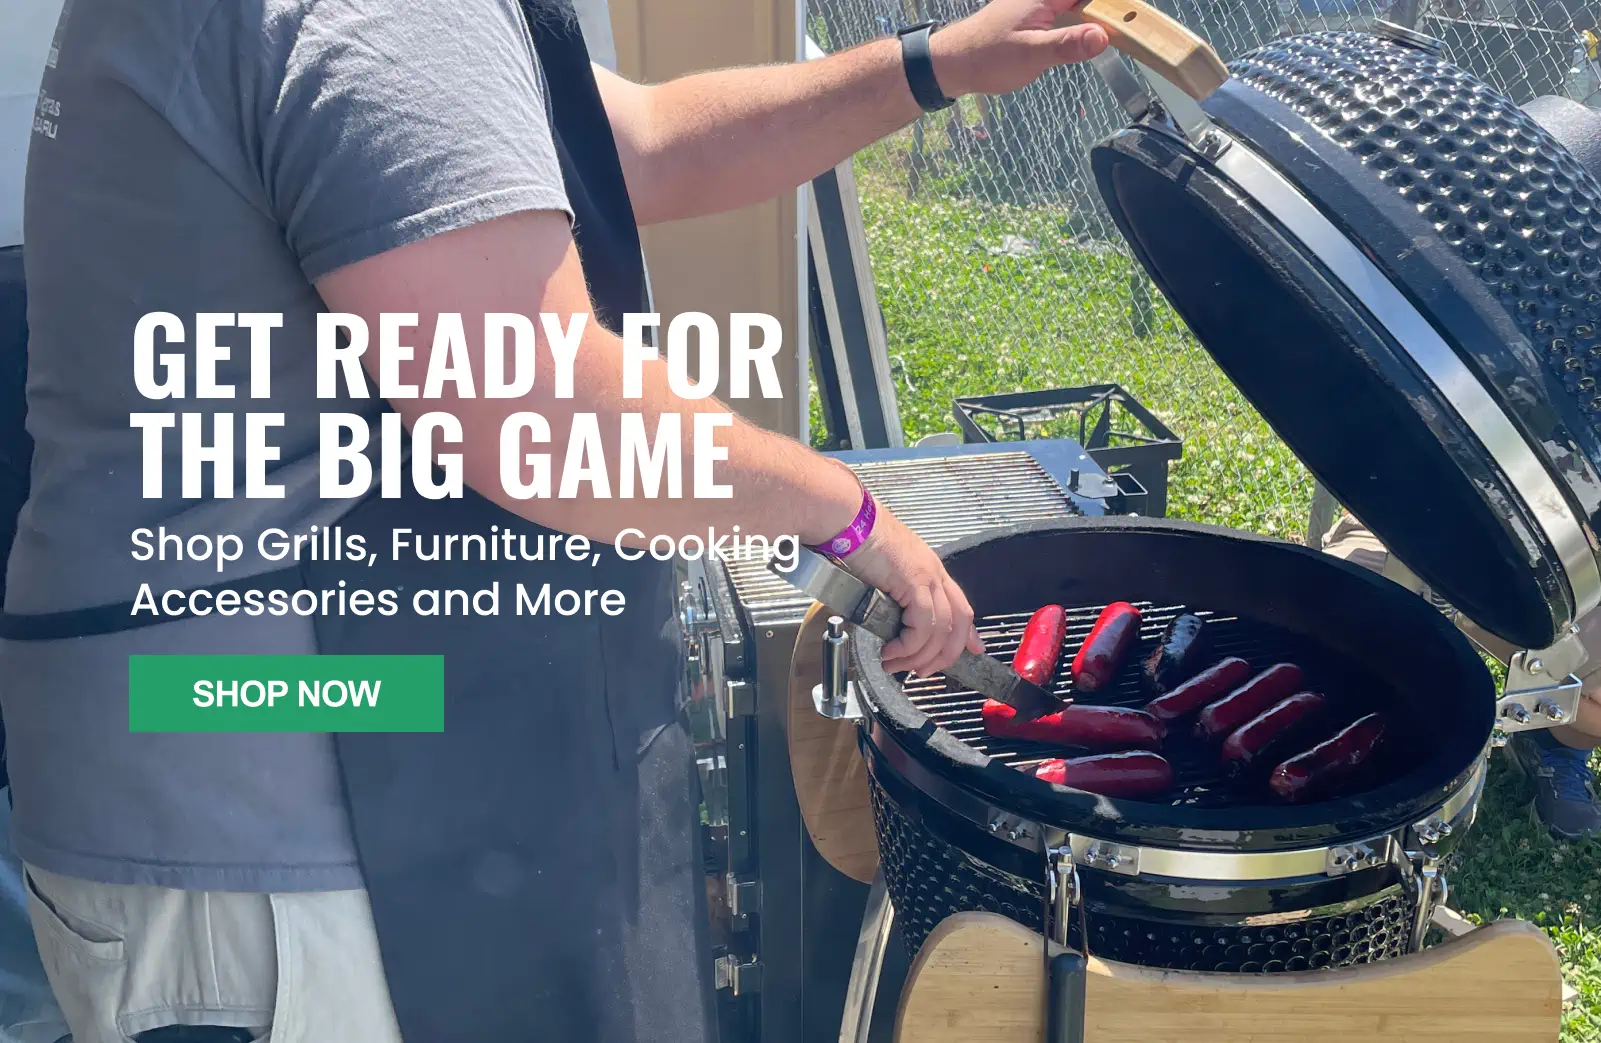 Promotion - Get ready for the big game. Shop Grills, Furniture, Cooking, Accesories, and More. Shop Now.